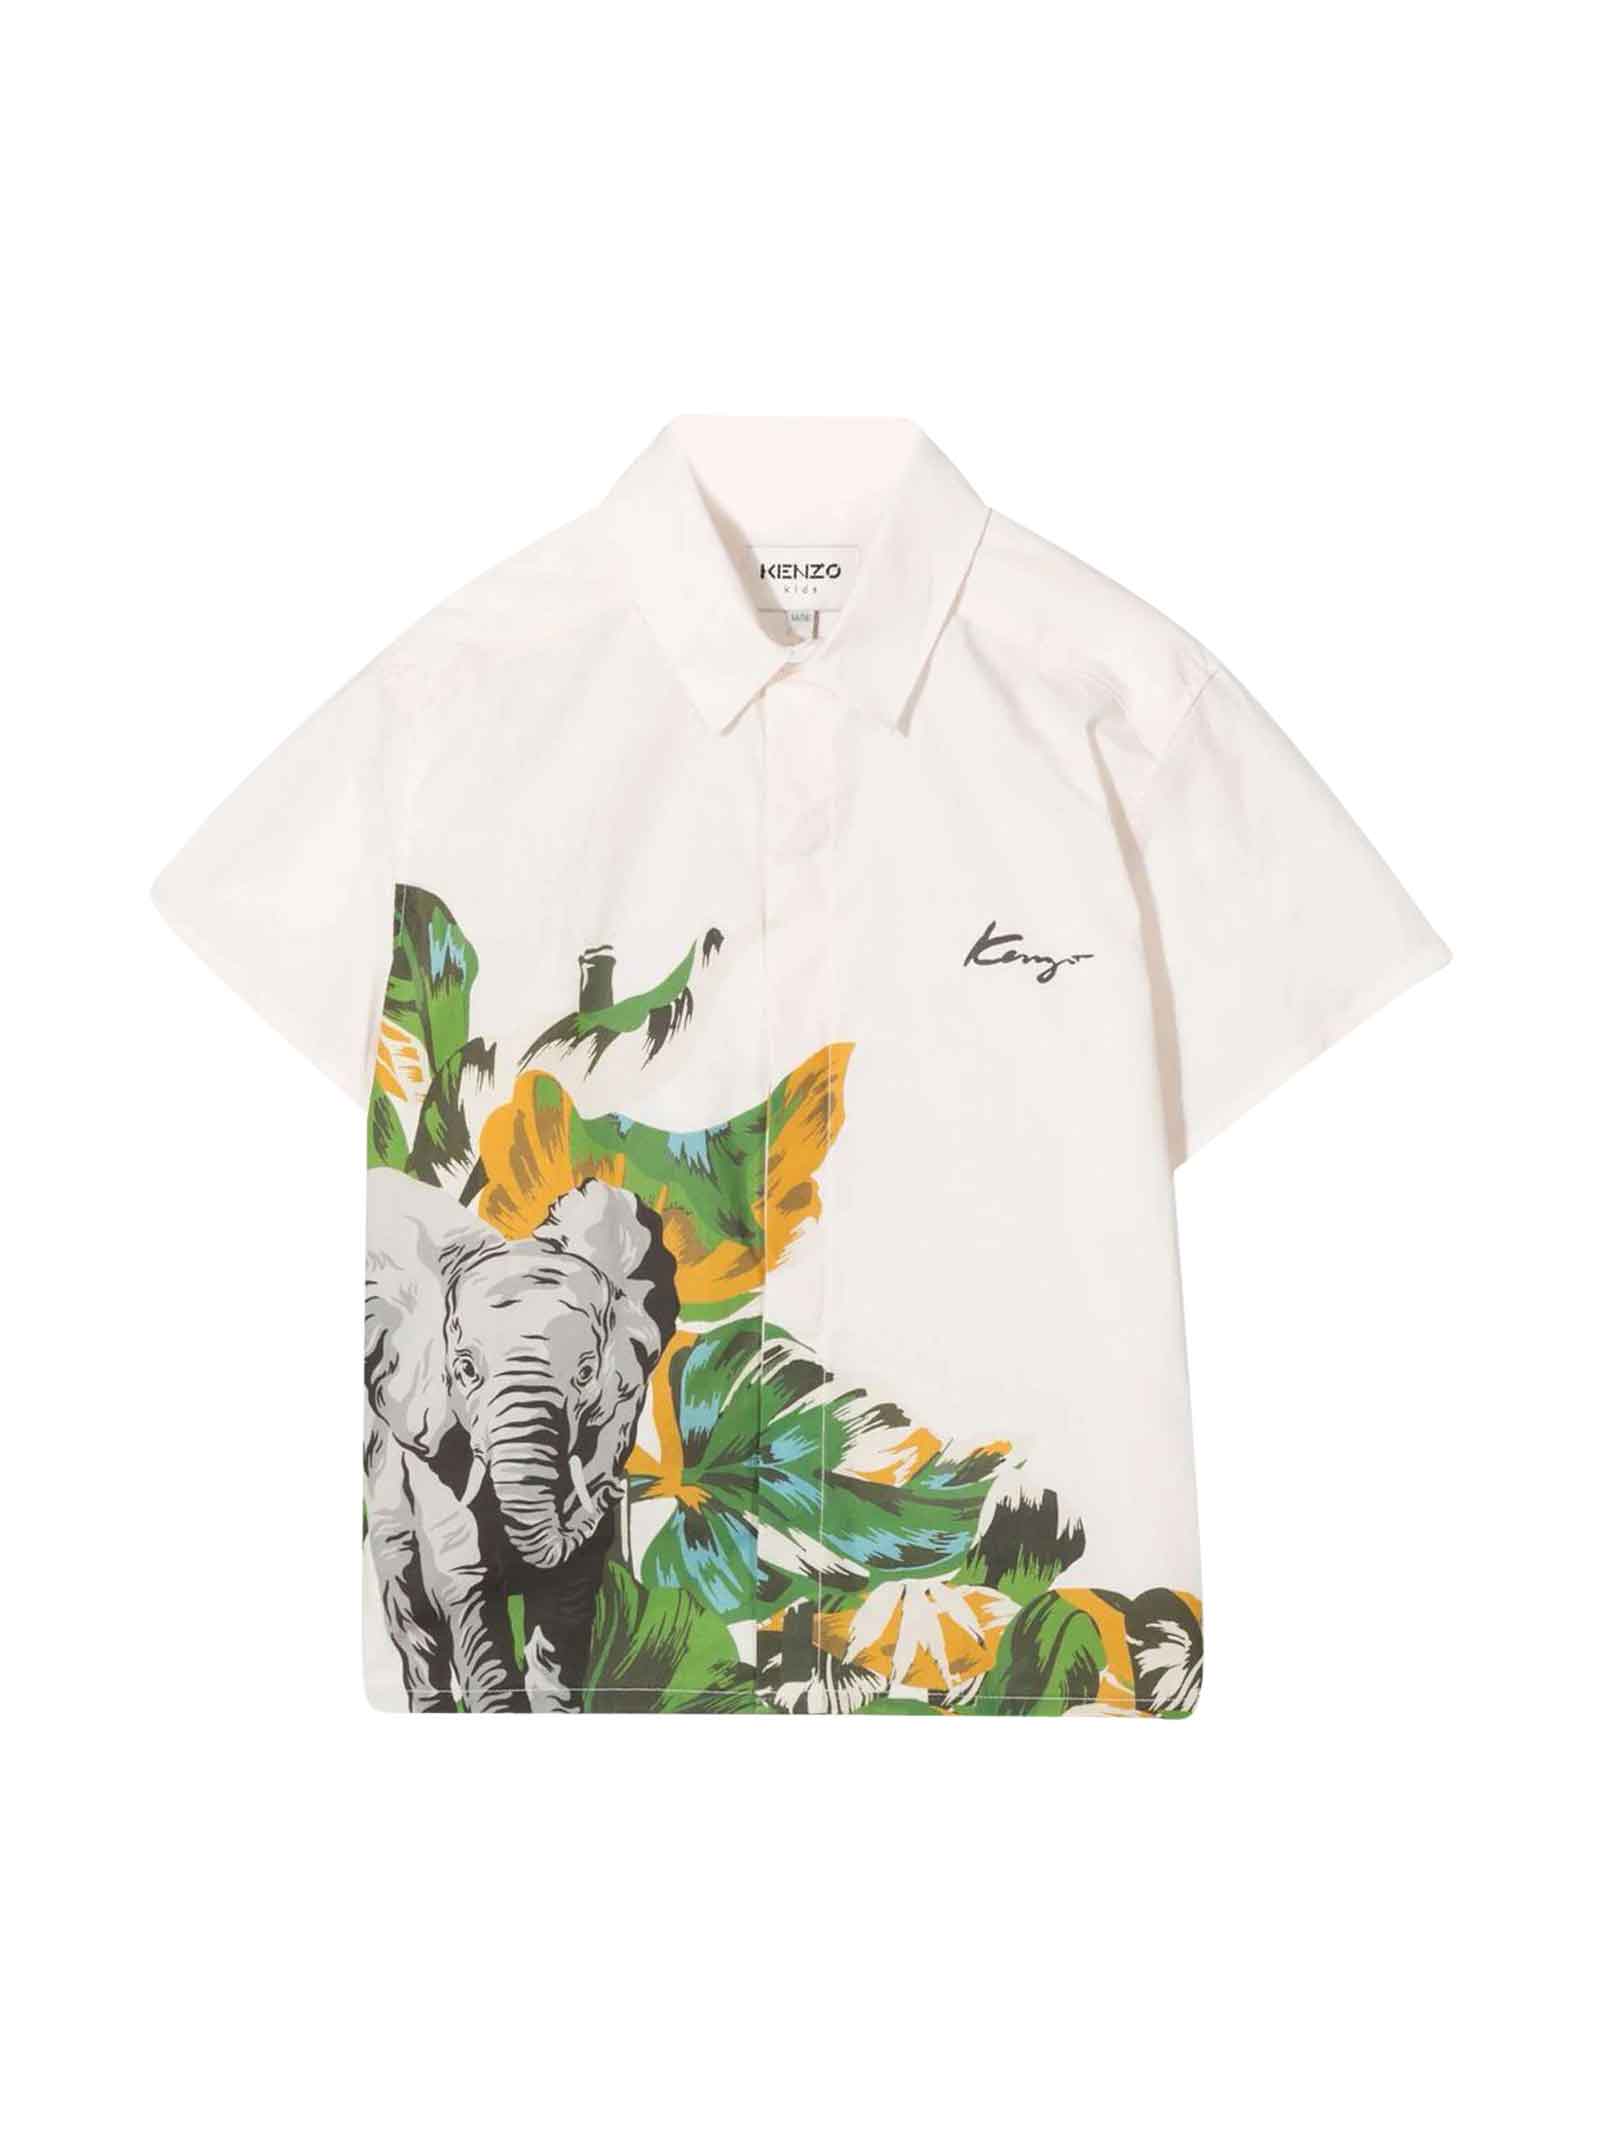 Kenzo Kids White Teen Boy Shirt With Jungle Print With Classic Collar, Short Sleeves, Front Closure With Buttons By.